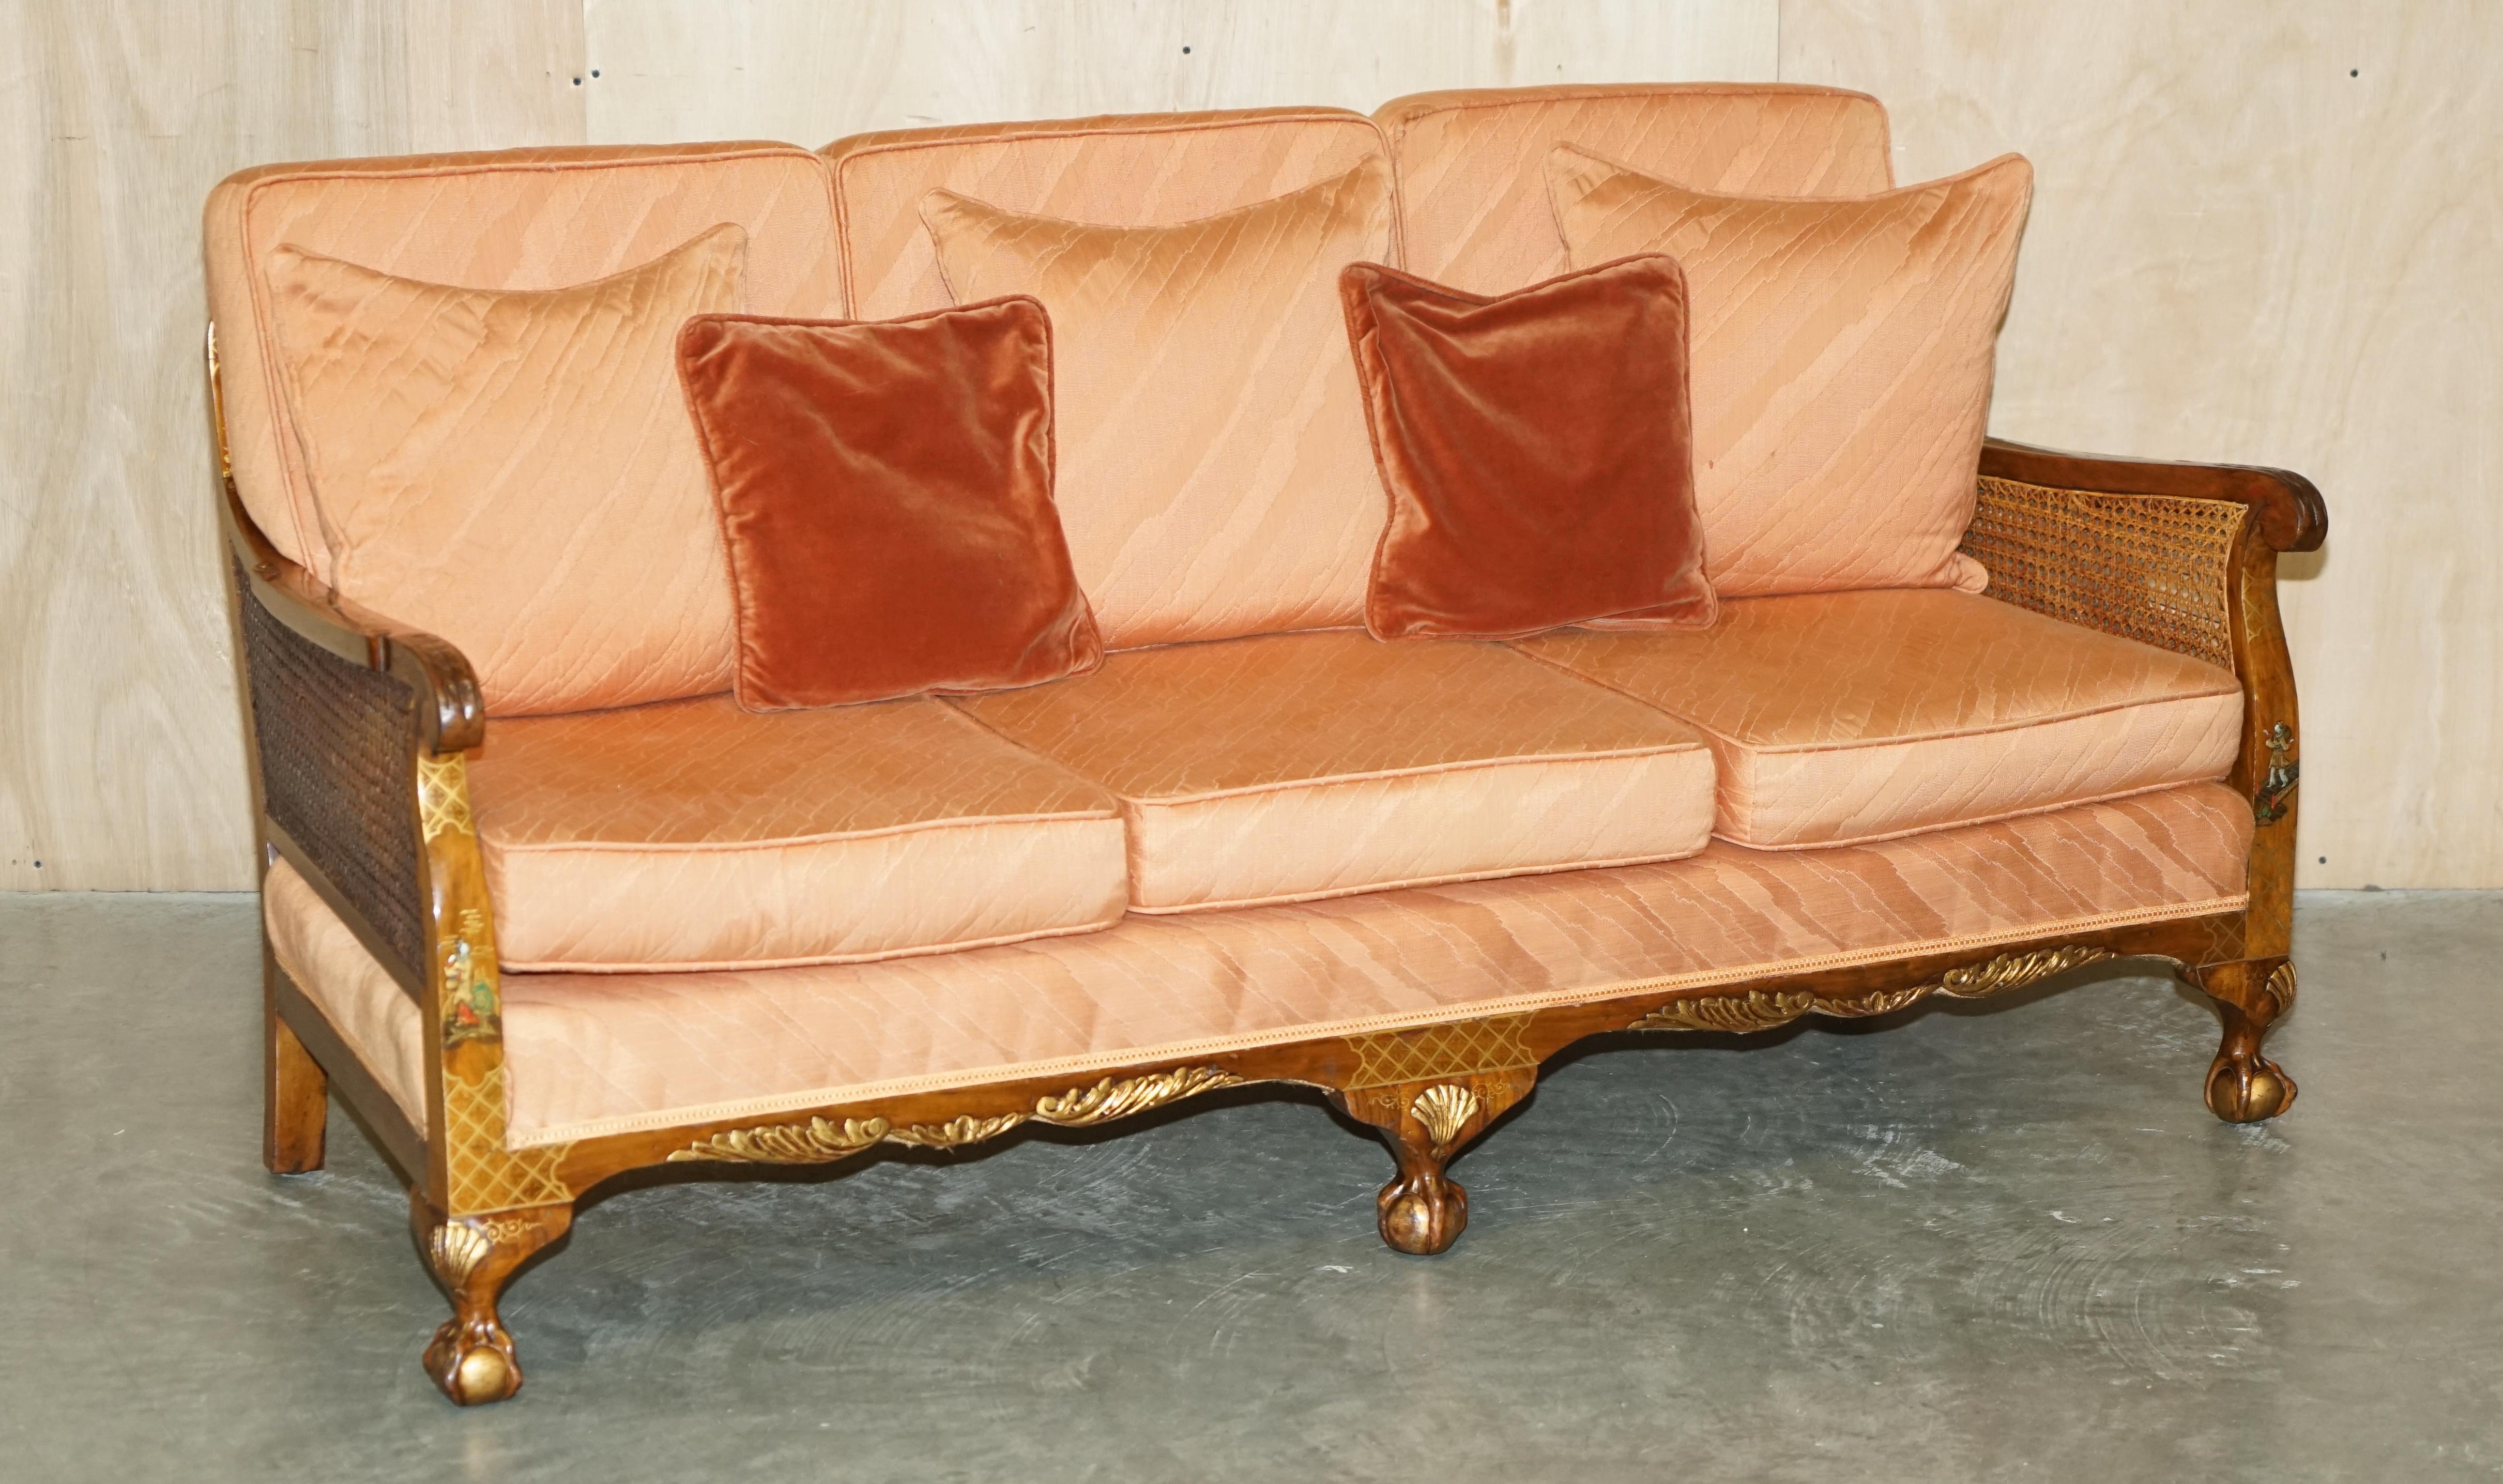 Chinese Export 1920's WALNUT & CHINOISERIE 3 PIECE BERGERE SOFA ARMCHAIR SUITE FOR RESTORATION For Sale